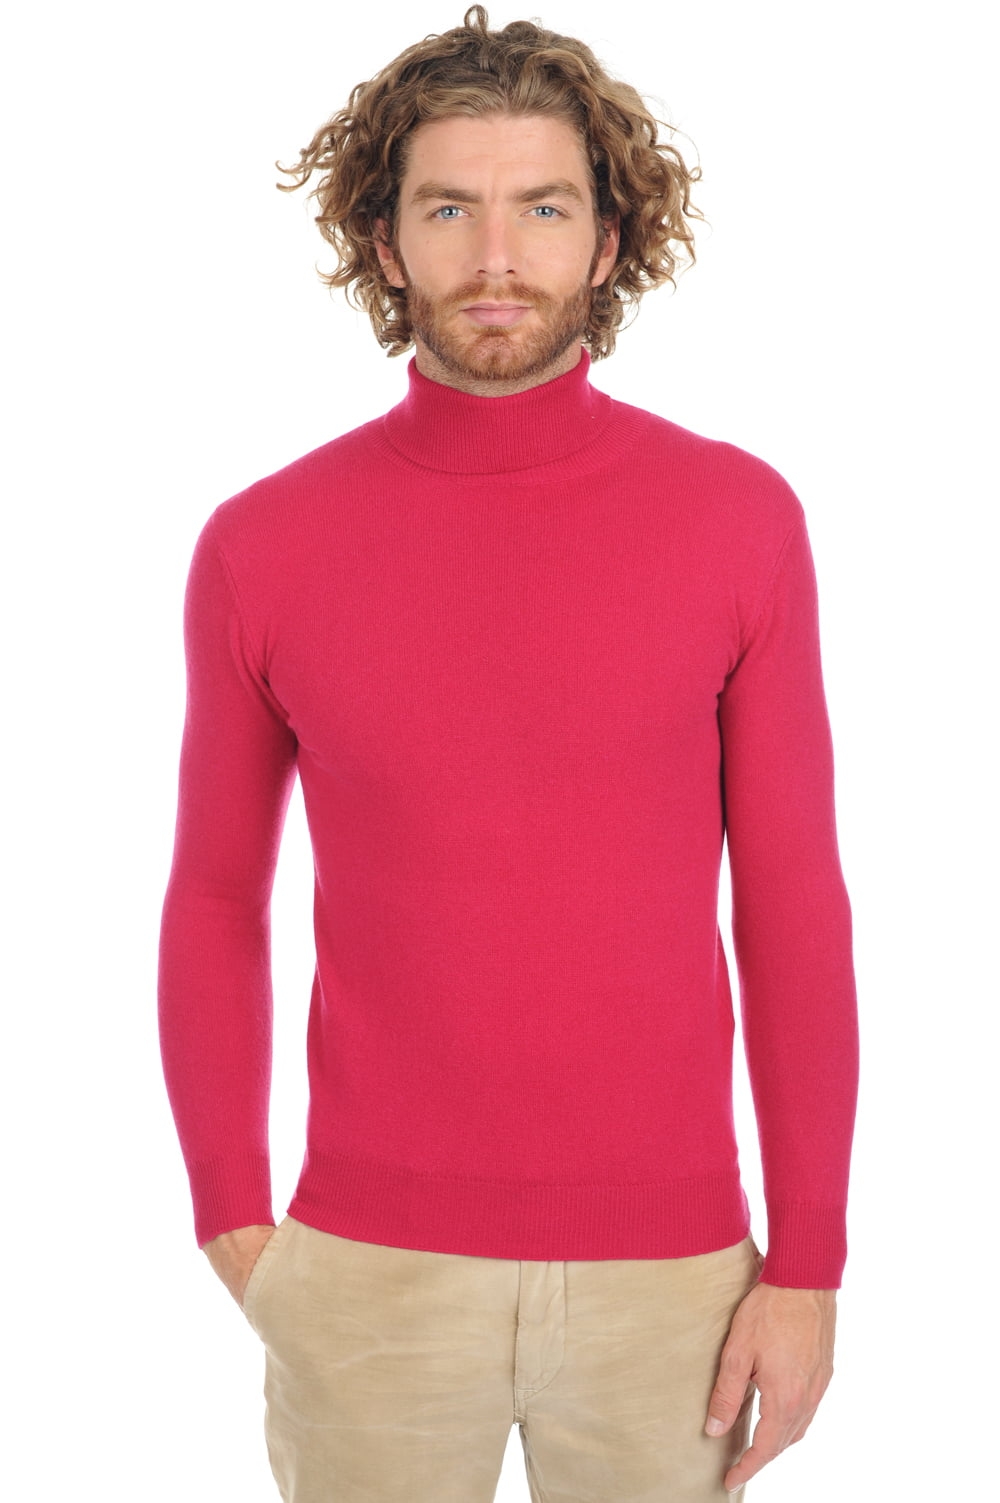 Cachemire petits prix homme tarry first red fuschsia l